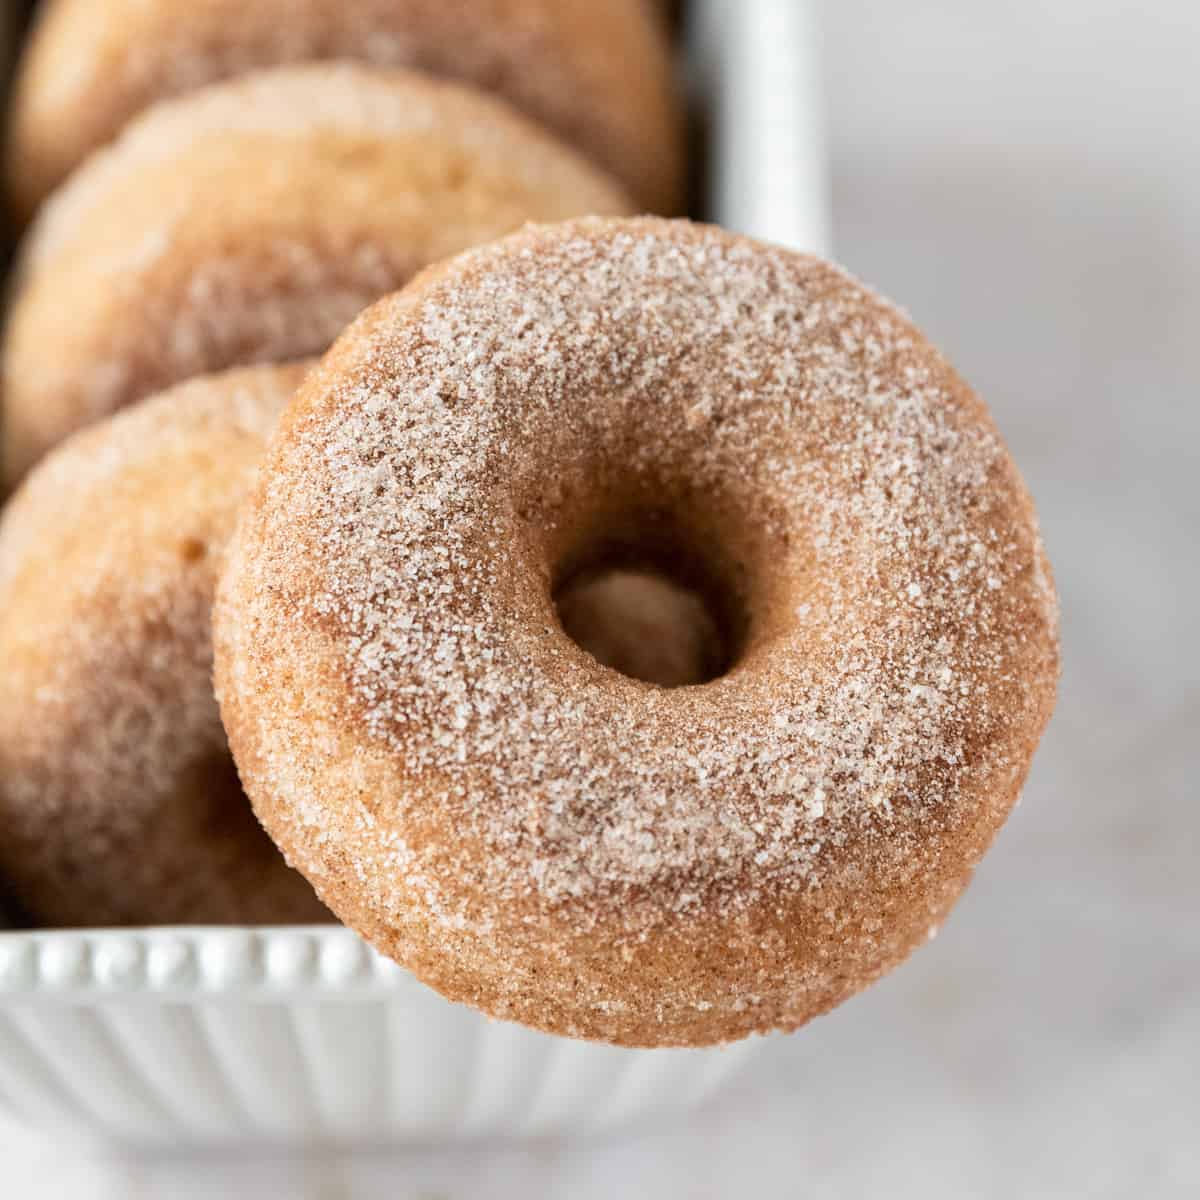 a close up of a cinnamon sugar donut balanced on the edge of a white dish with other donuts in the background